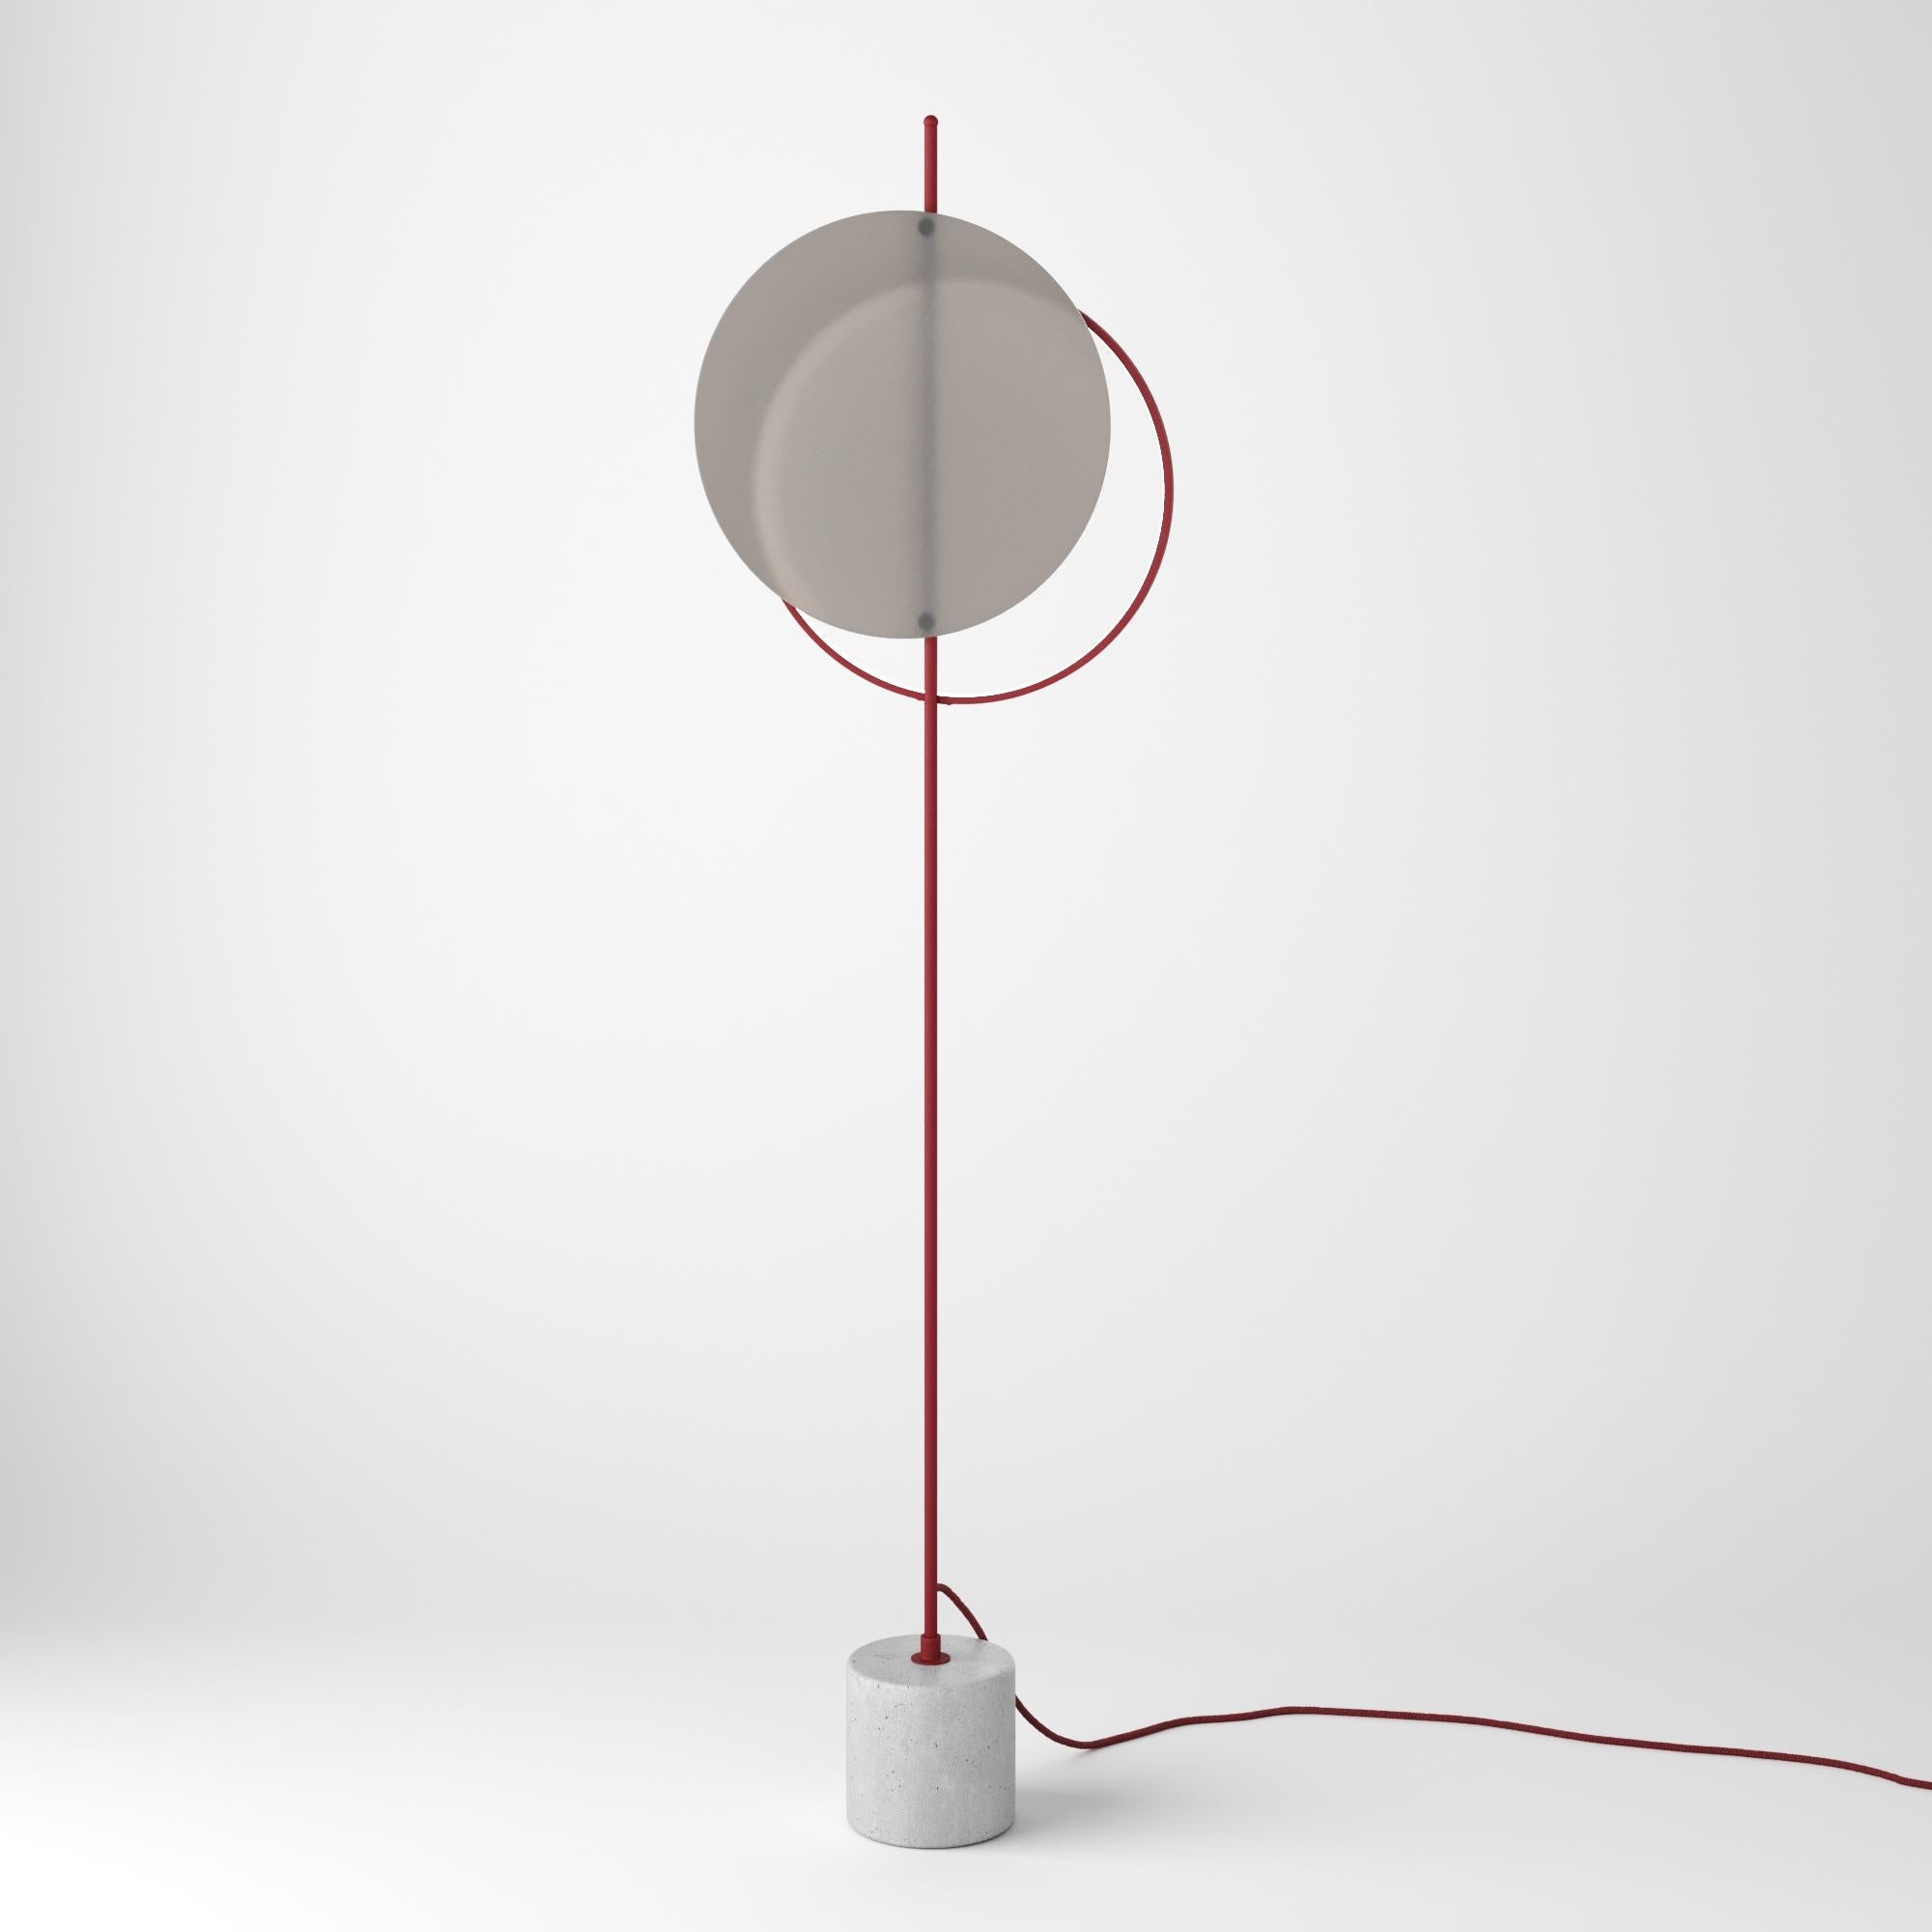 Stylish Minimalistic Contemporary Floor Lamp Glass Edition In New Condition For Sale In Vilnius, LT